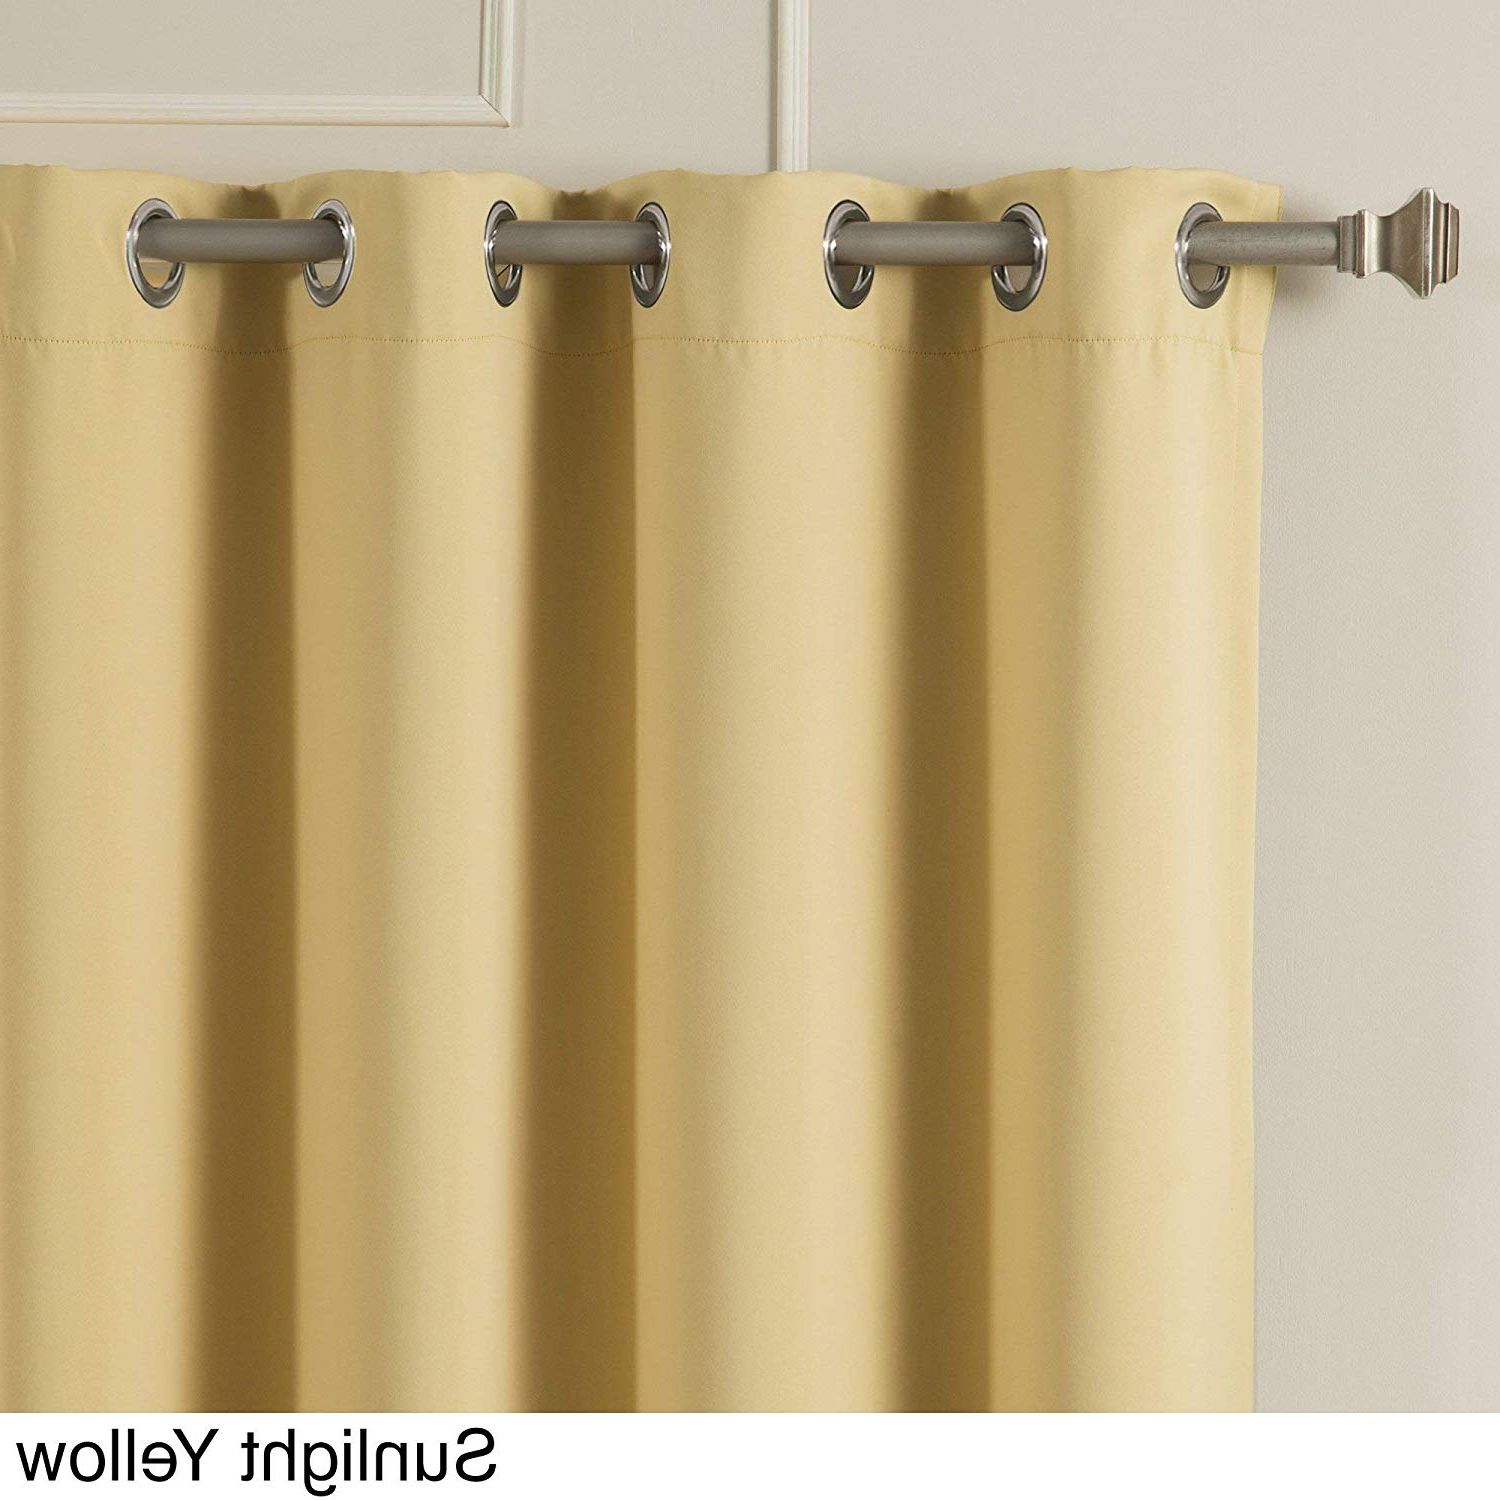 Amazon: Aurora Home Silvertone Grommet Top Thermal Intended For Current Antique Silver Grommet Top Thermal Insulated Blackout Curtain Panel Pairs (View 5 of 20)